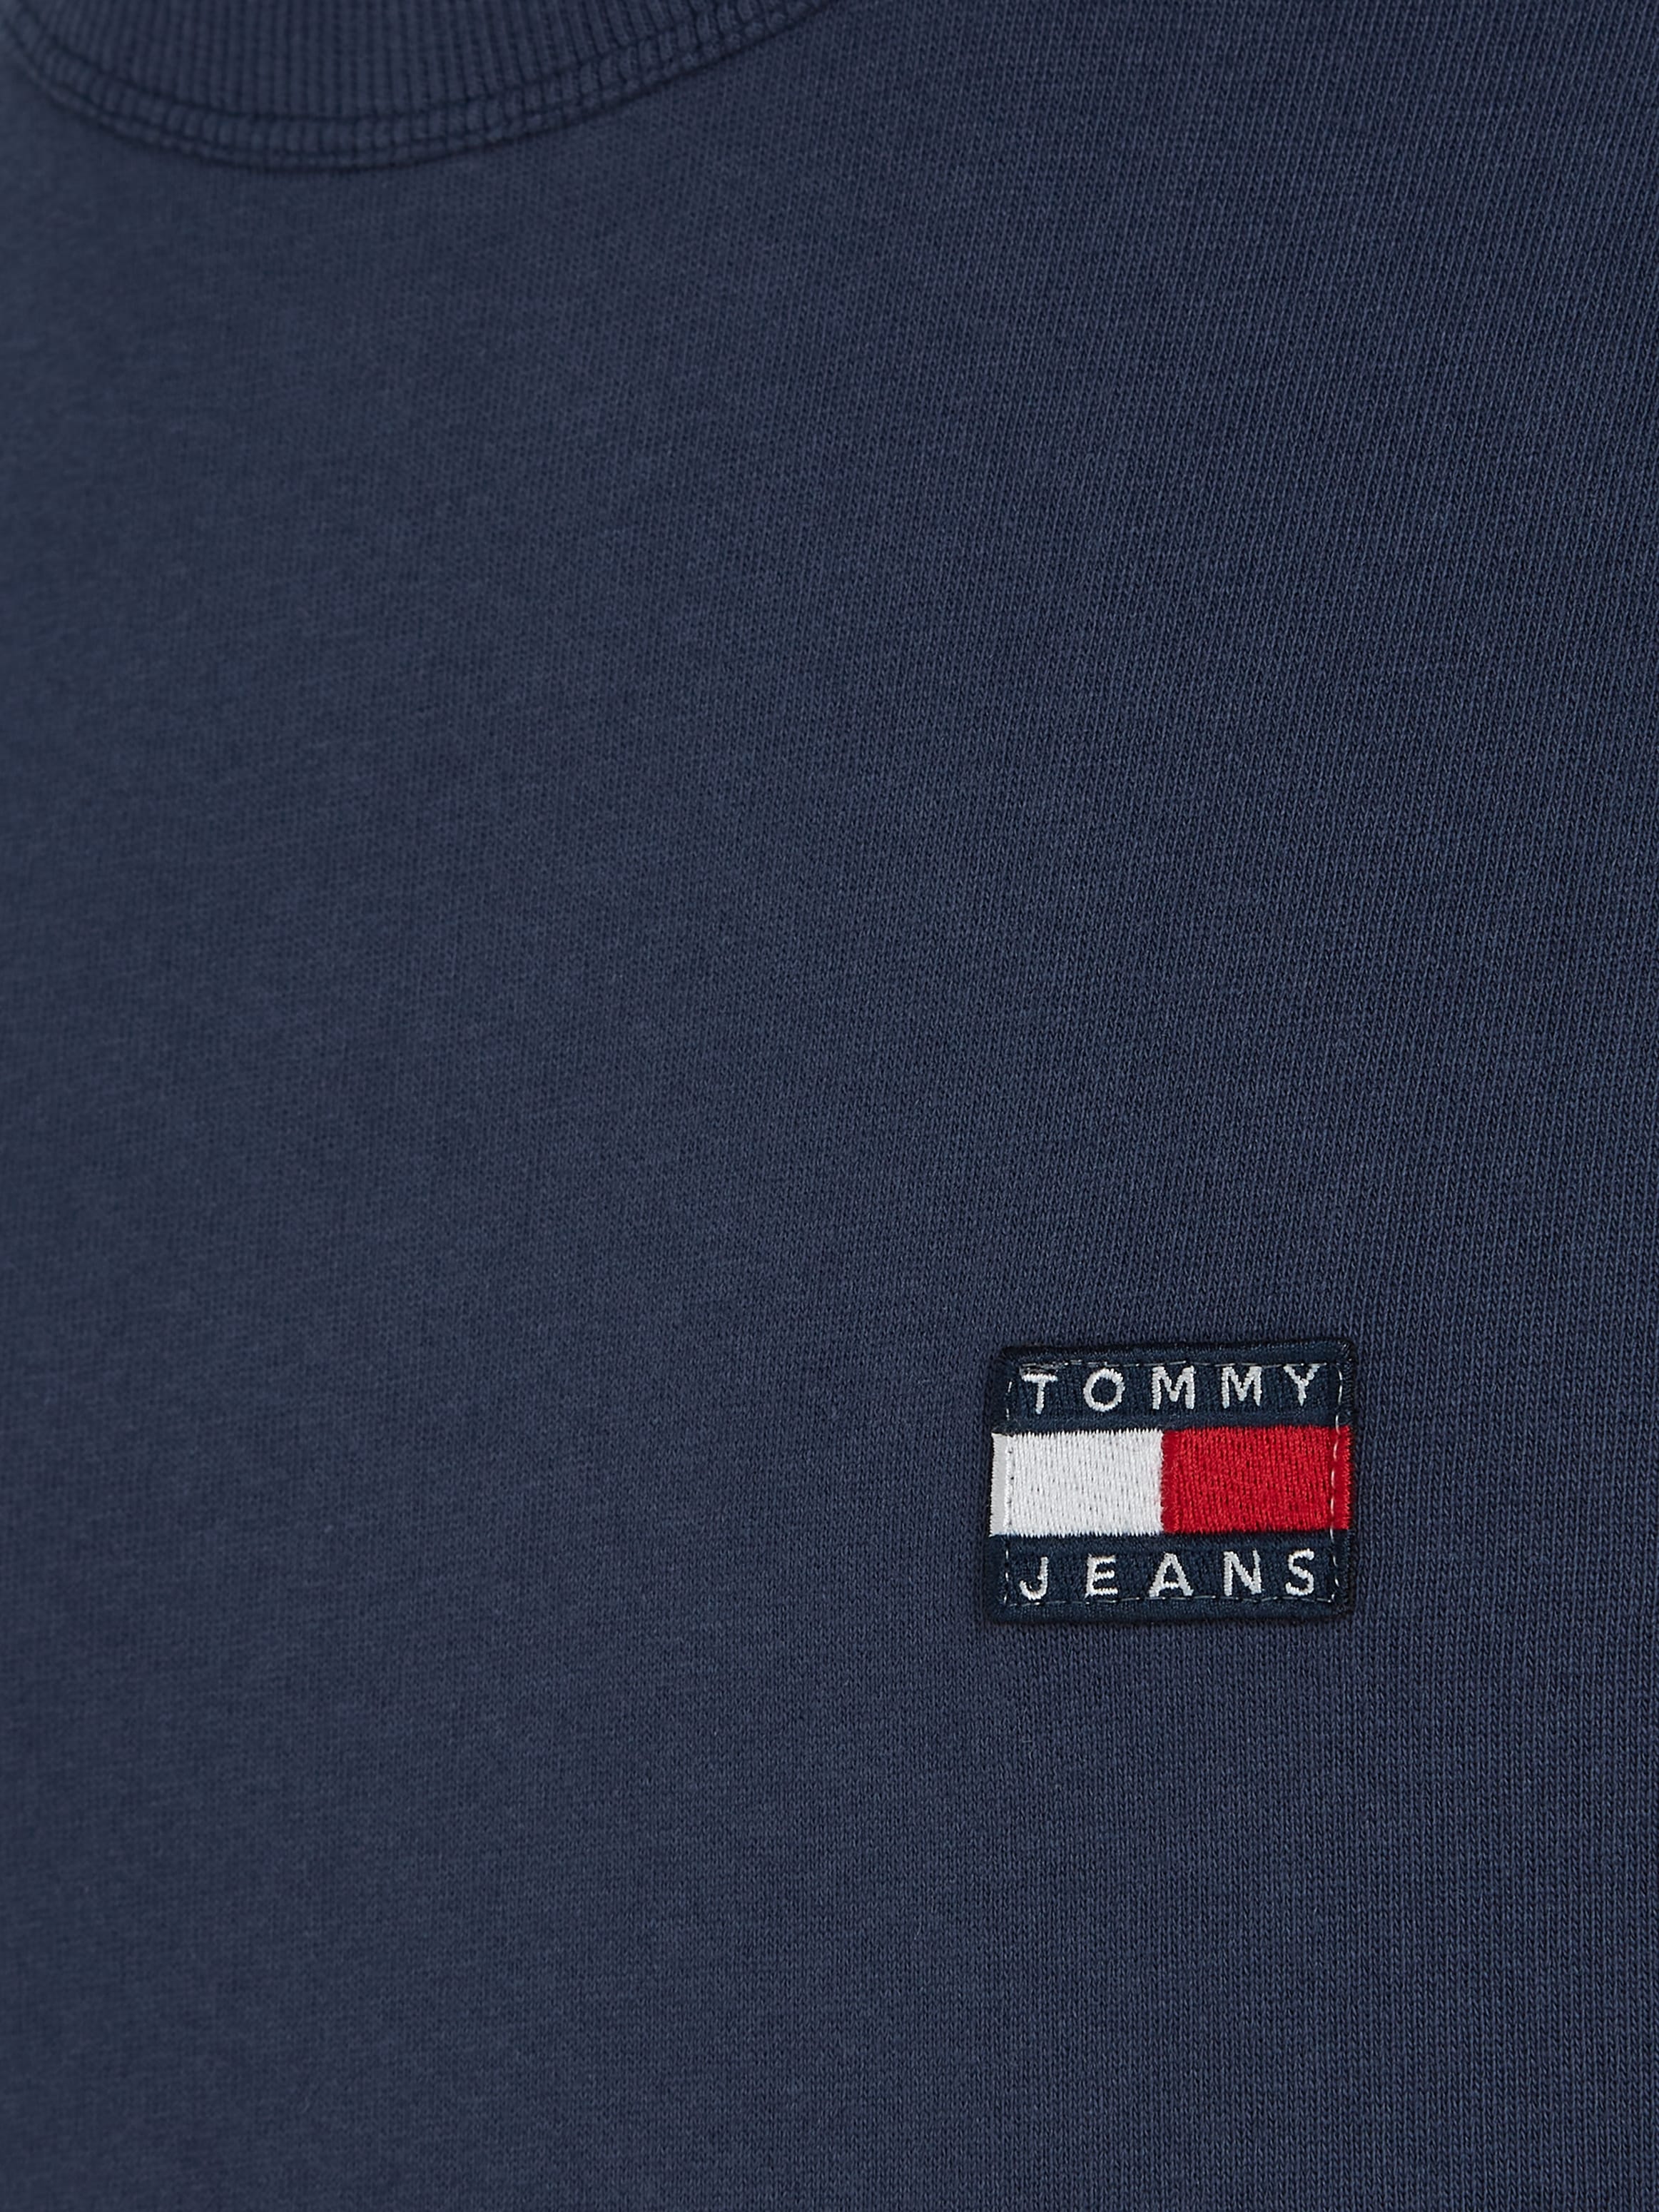 OTTO shoppen XS T-Shirt Jeans CLSC bei TEE« »TJM TOMMY Tommy online BADGE